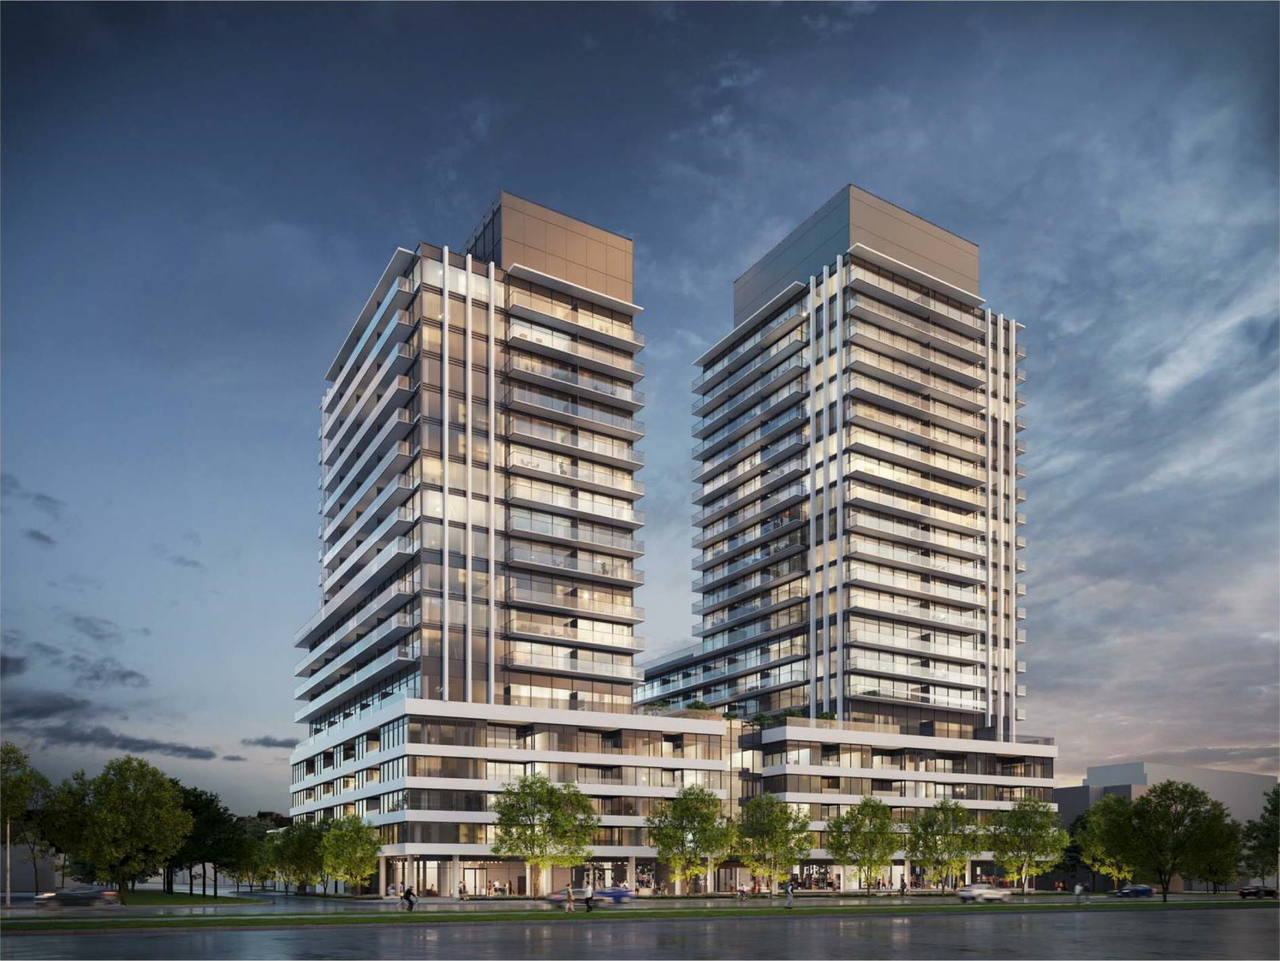 9750 Yonge St is a new high rise condo complex by JD Development Group located in 9750 Yonge St, Richmond Hill, ON.